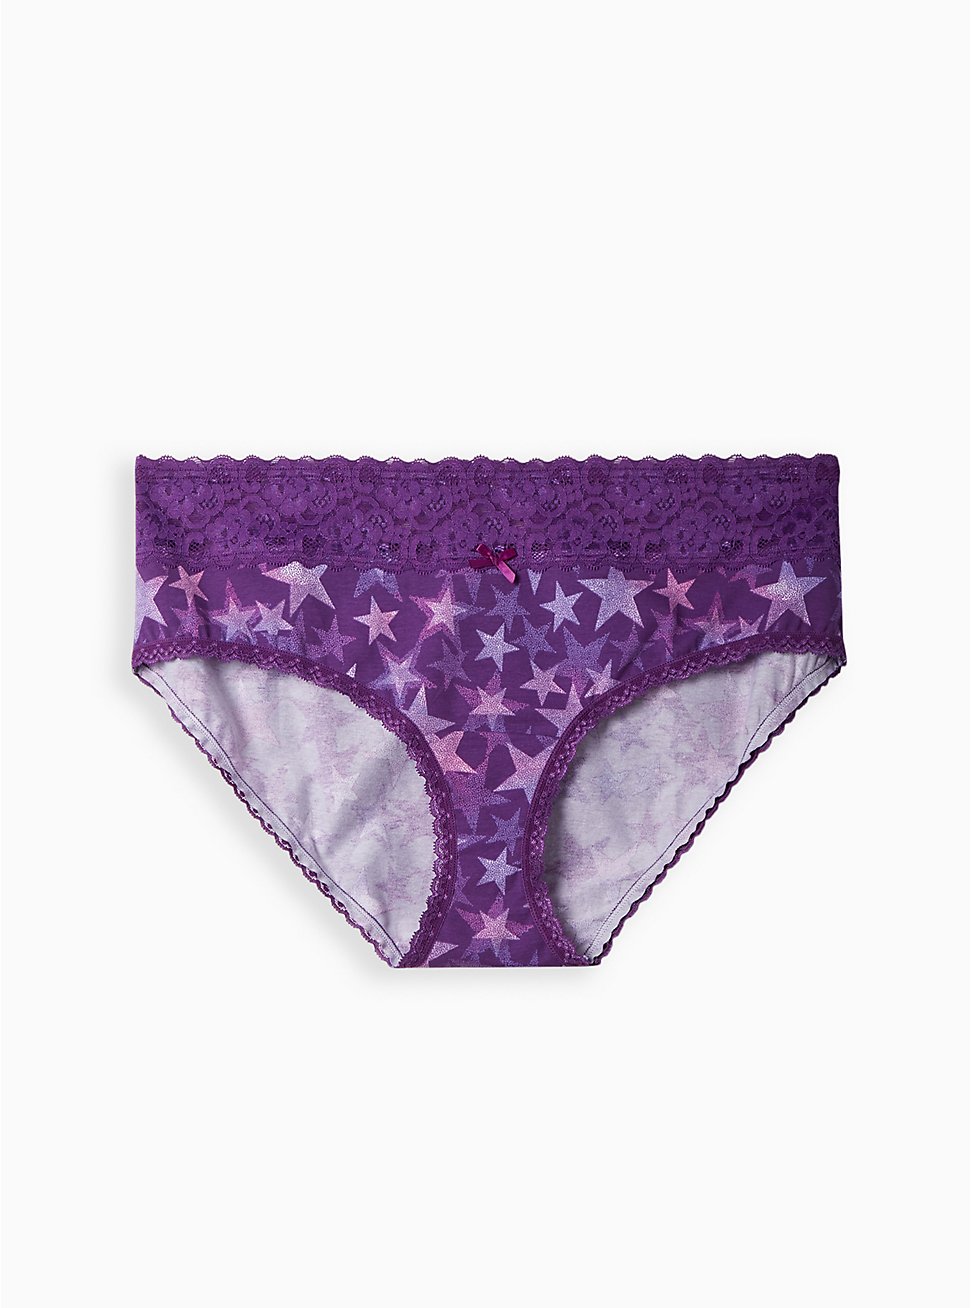 Cotton Mid-Rise Hipster Lace Trim Panty, DOTTED STAR PURPLE, hi-res